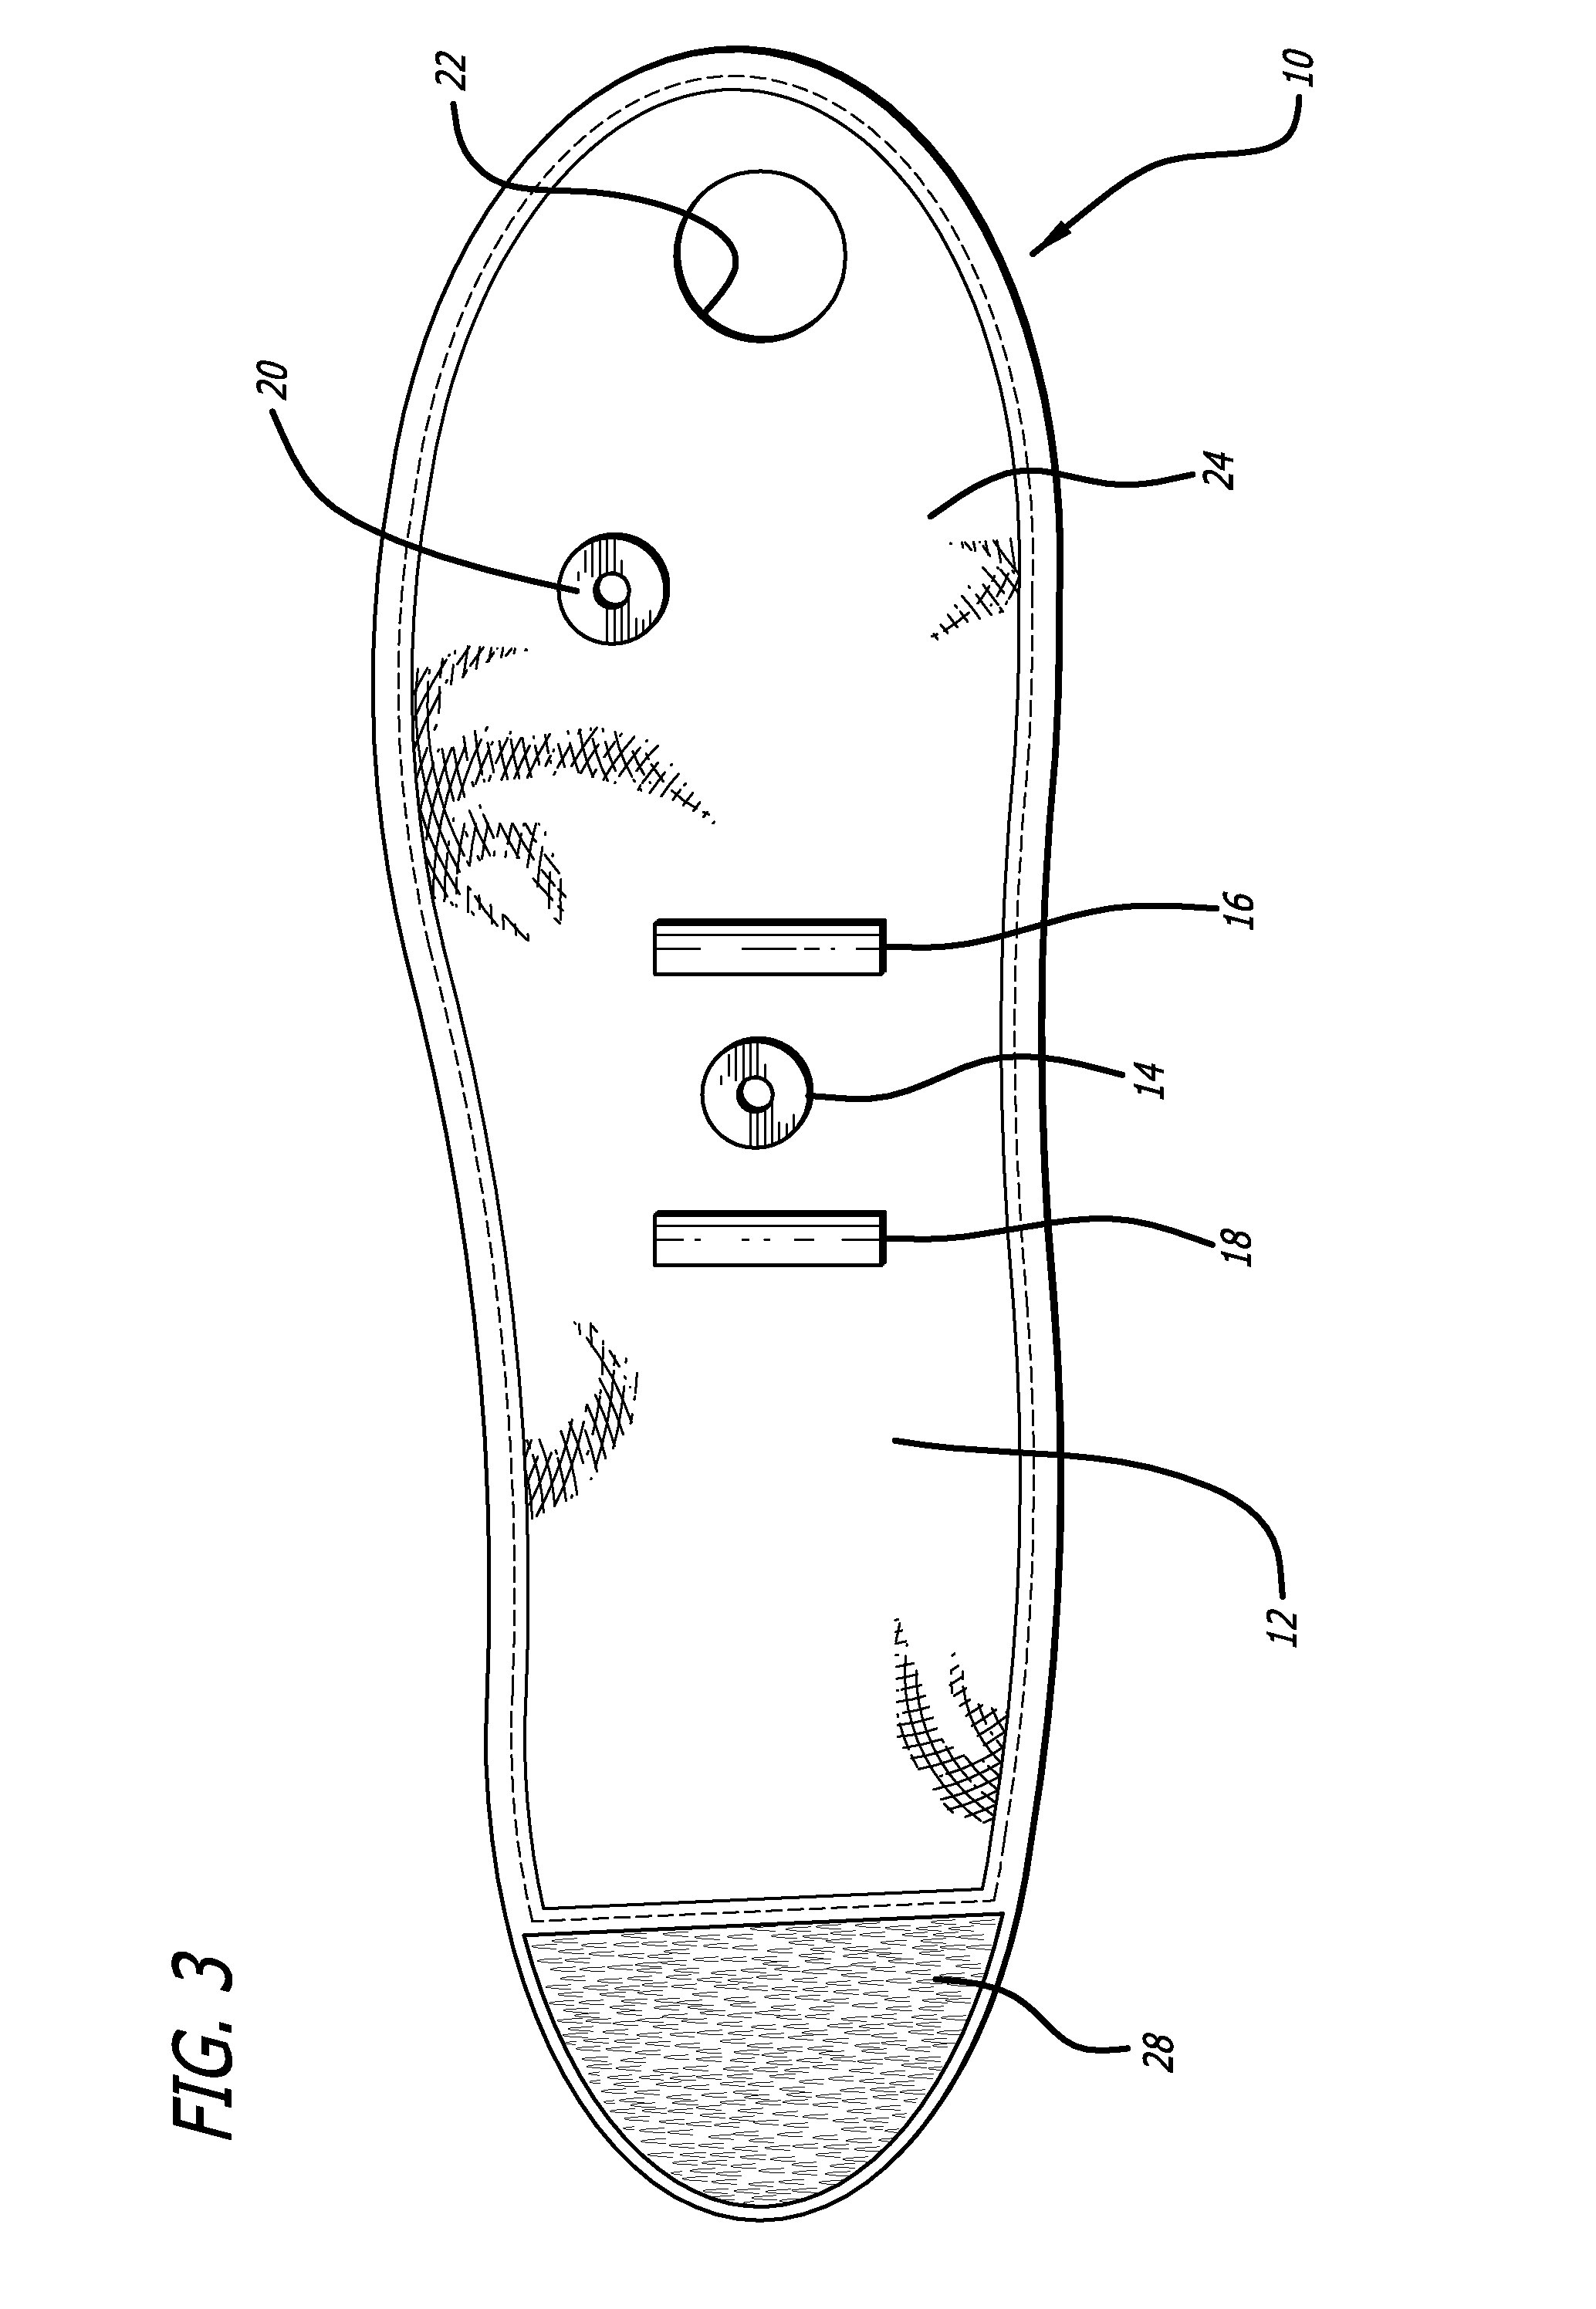 Wrist brace and method for alleviating and preventing wrist pain